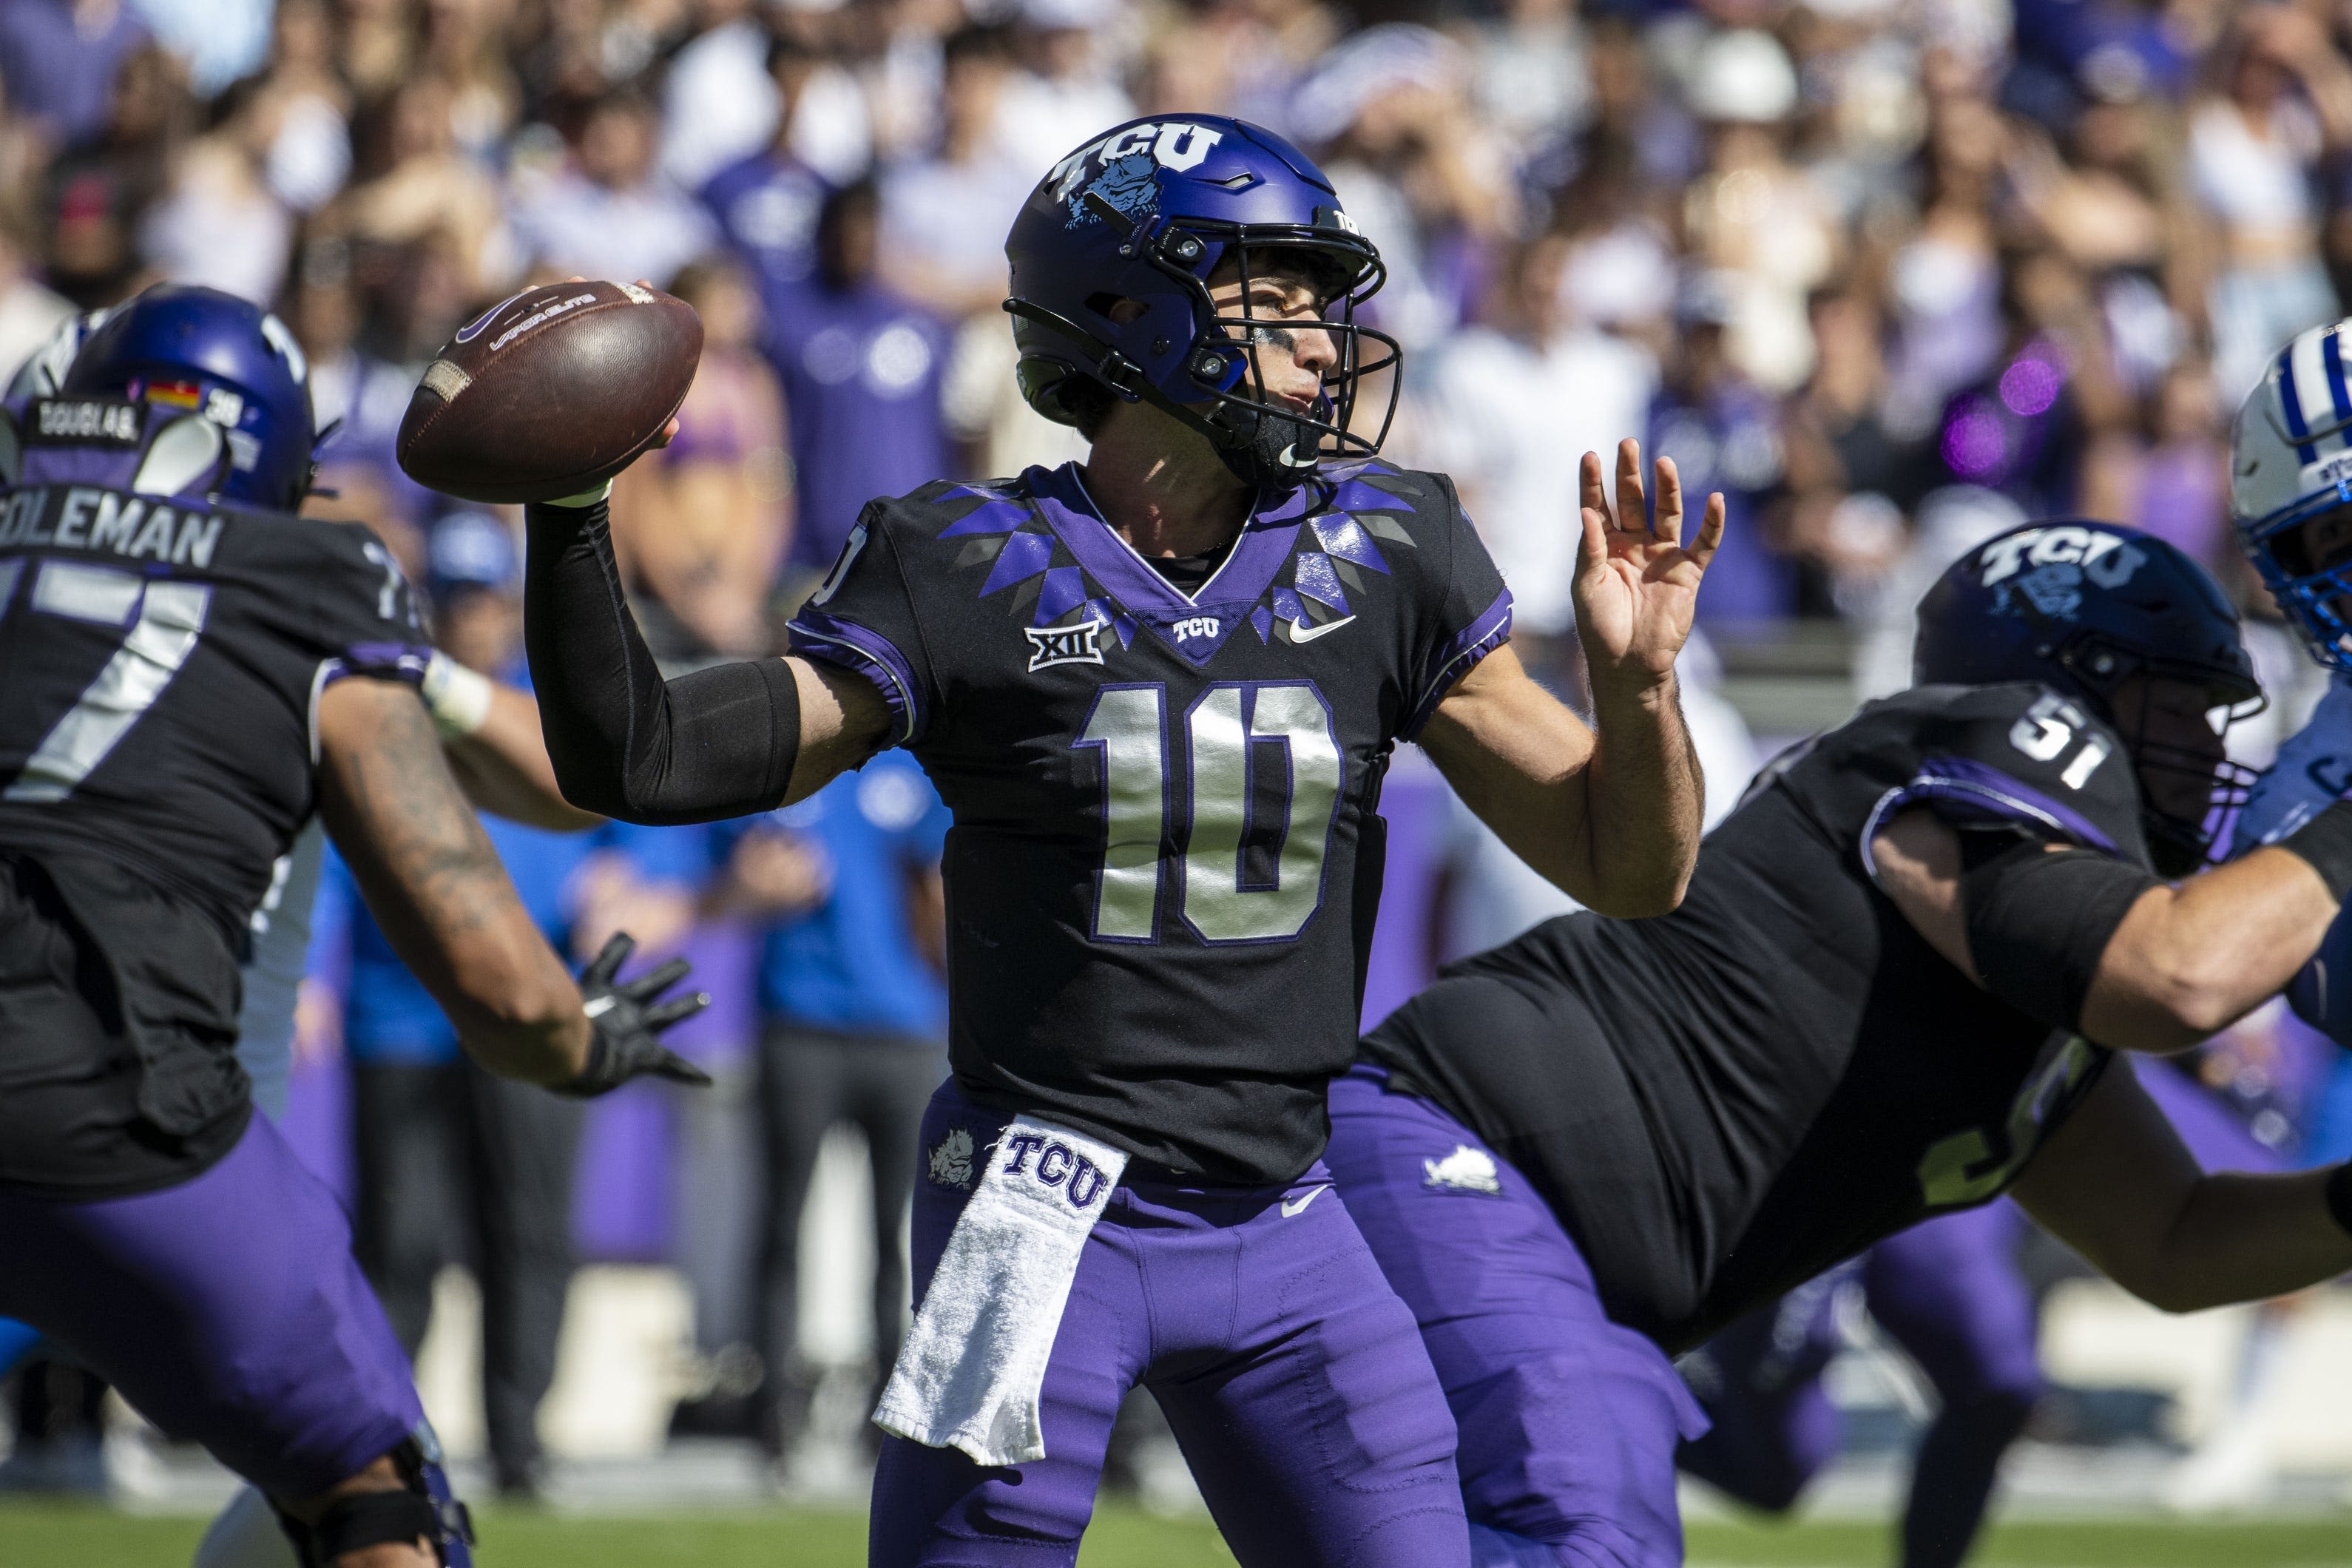 UCF opponent previews: TCU, 2 seasons removed from title game, kicks off Big 12 play